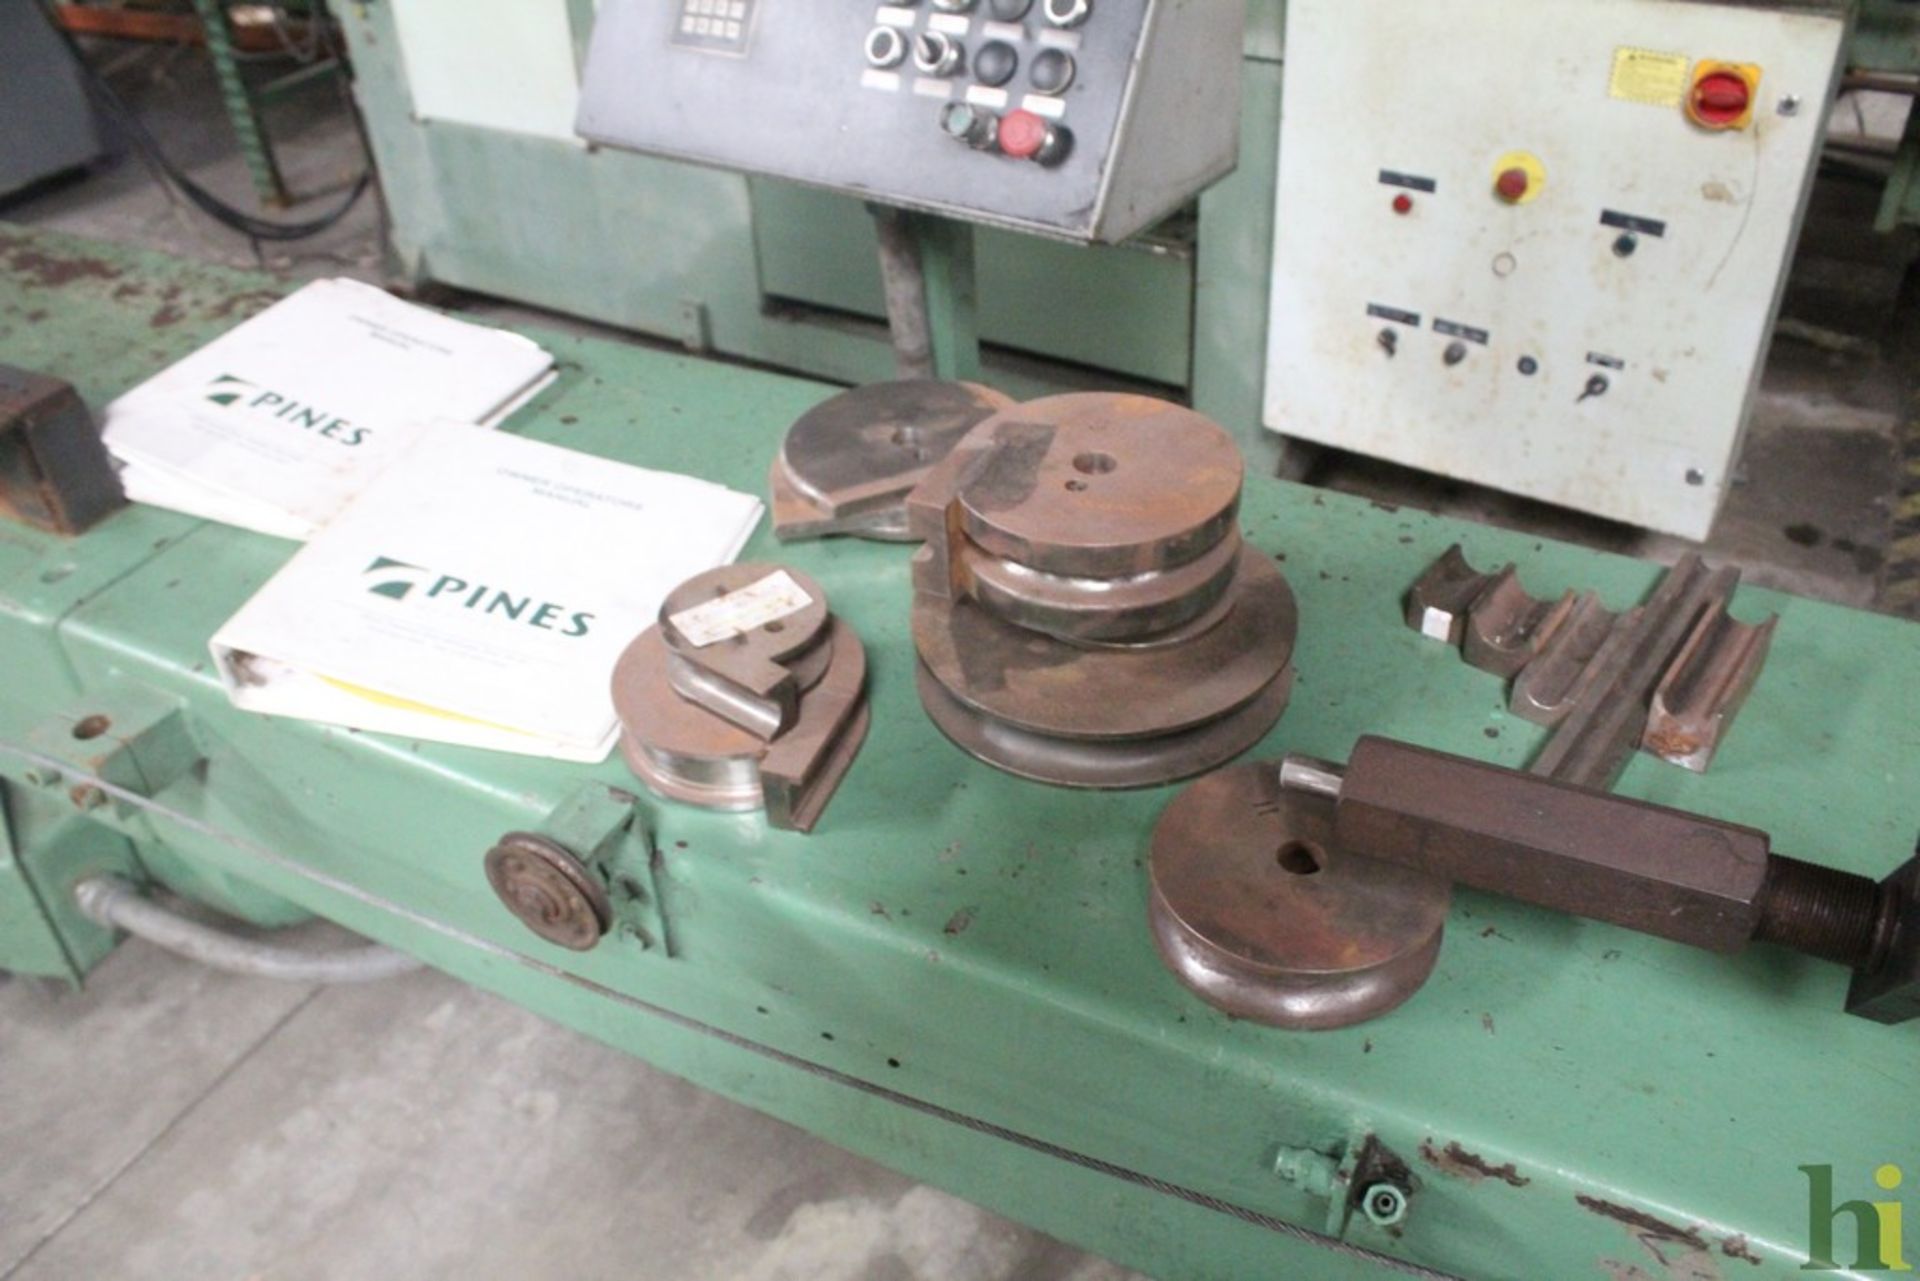 PINES NO. 2 HYDRAULIC TUBE BENDER WITH DIES - Image 6 of 8